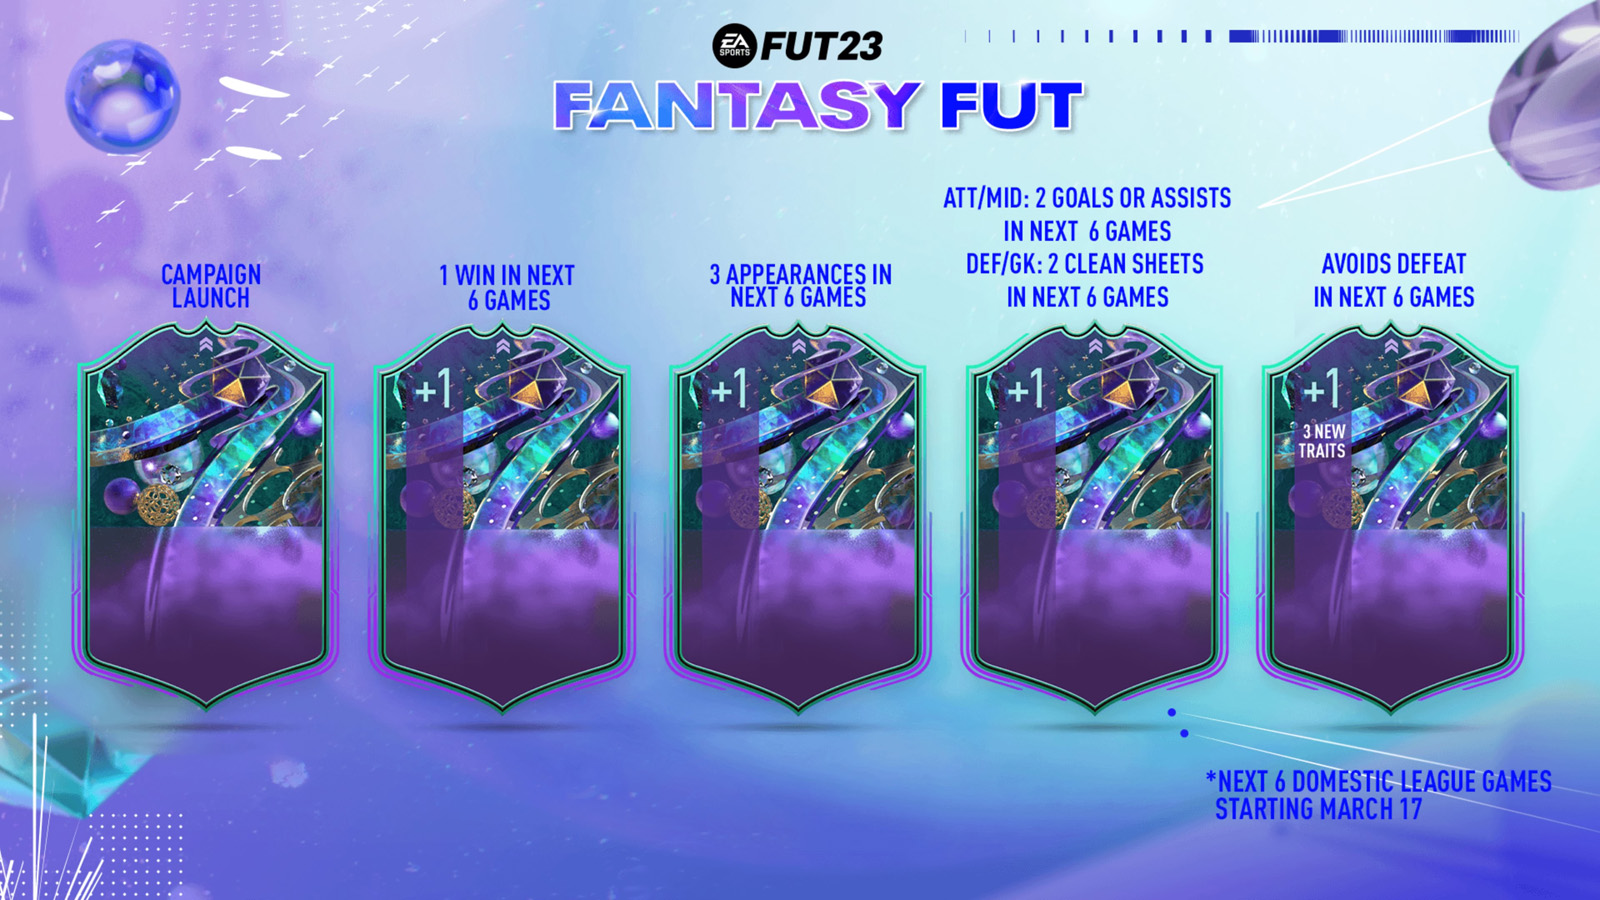 Fut Sheriff on X: 🚨All cards added for FUT Fantasy ! Stats are